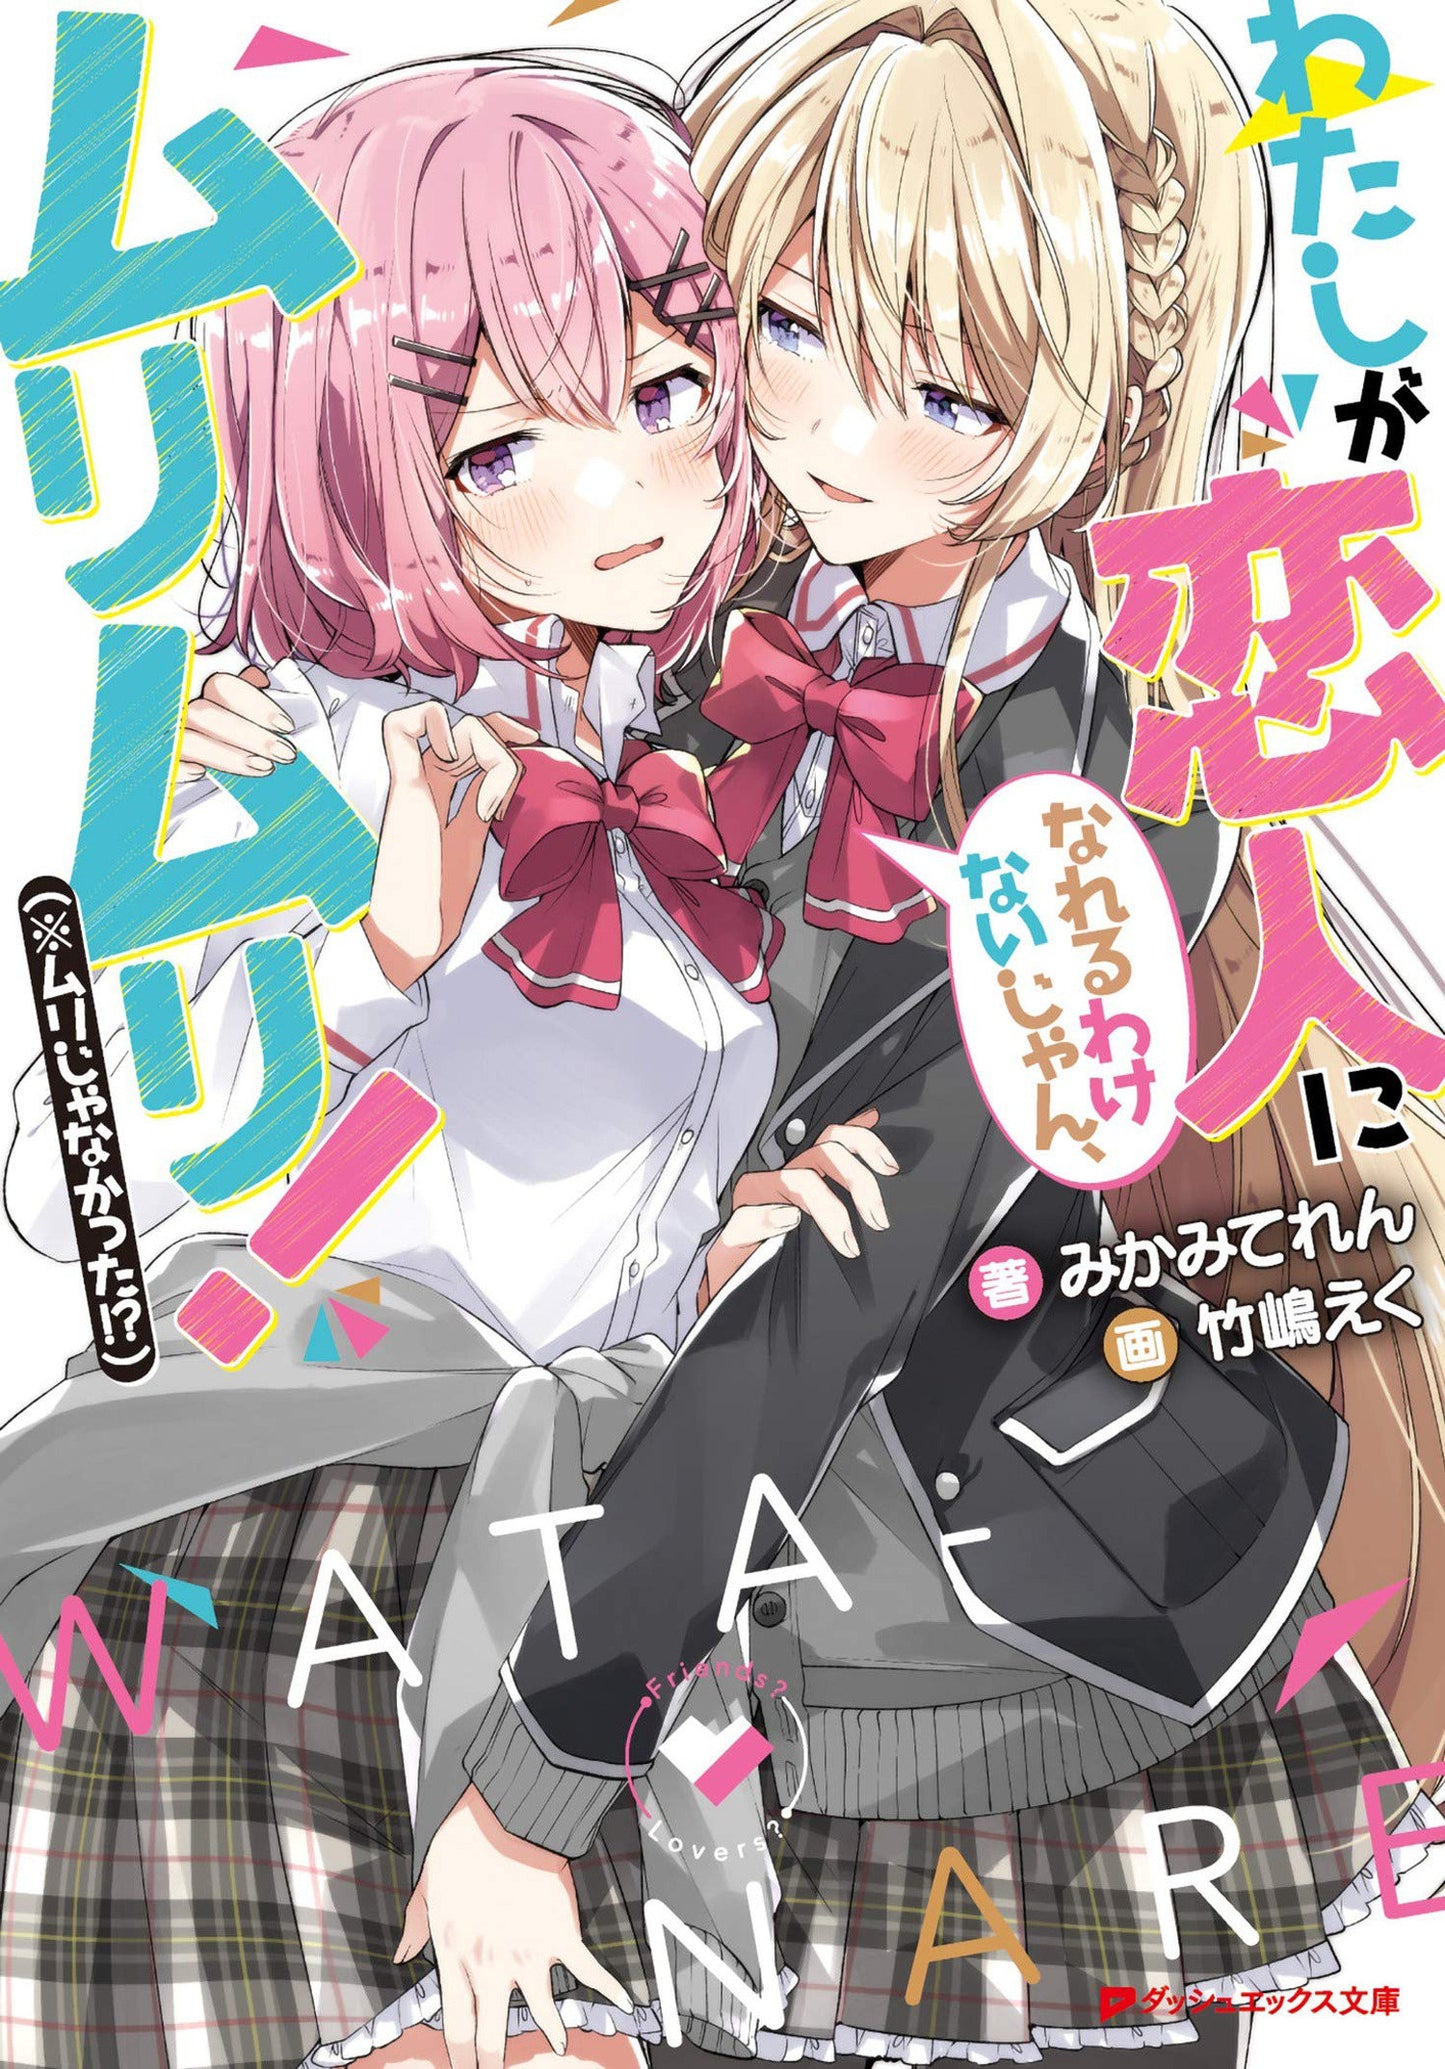 There's No Freaking Way I'll be Your Lover! Unless... (Light Novel) Vol. 1